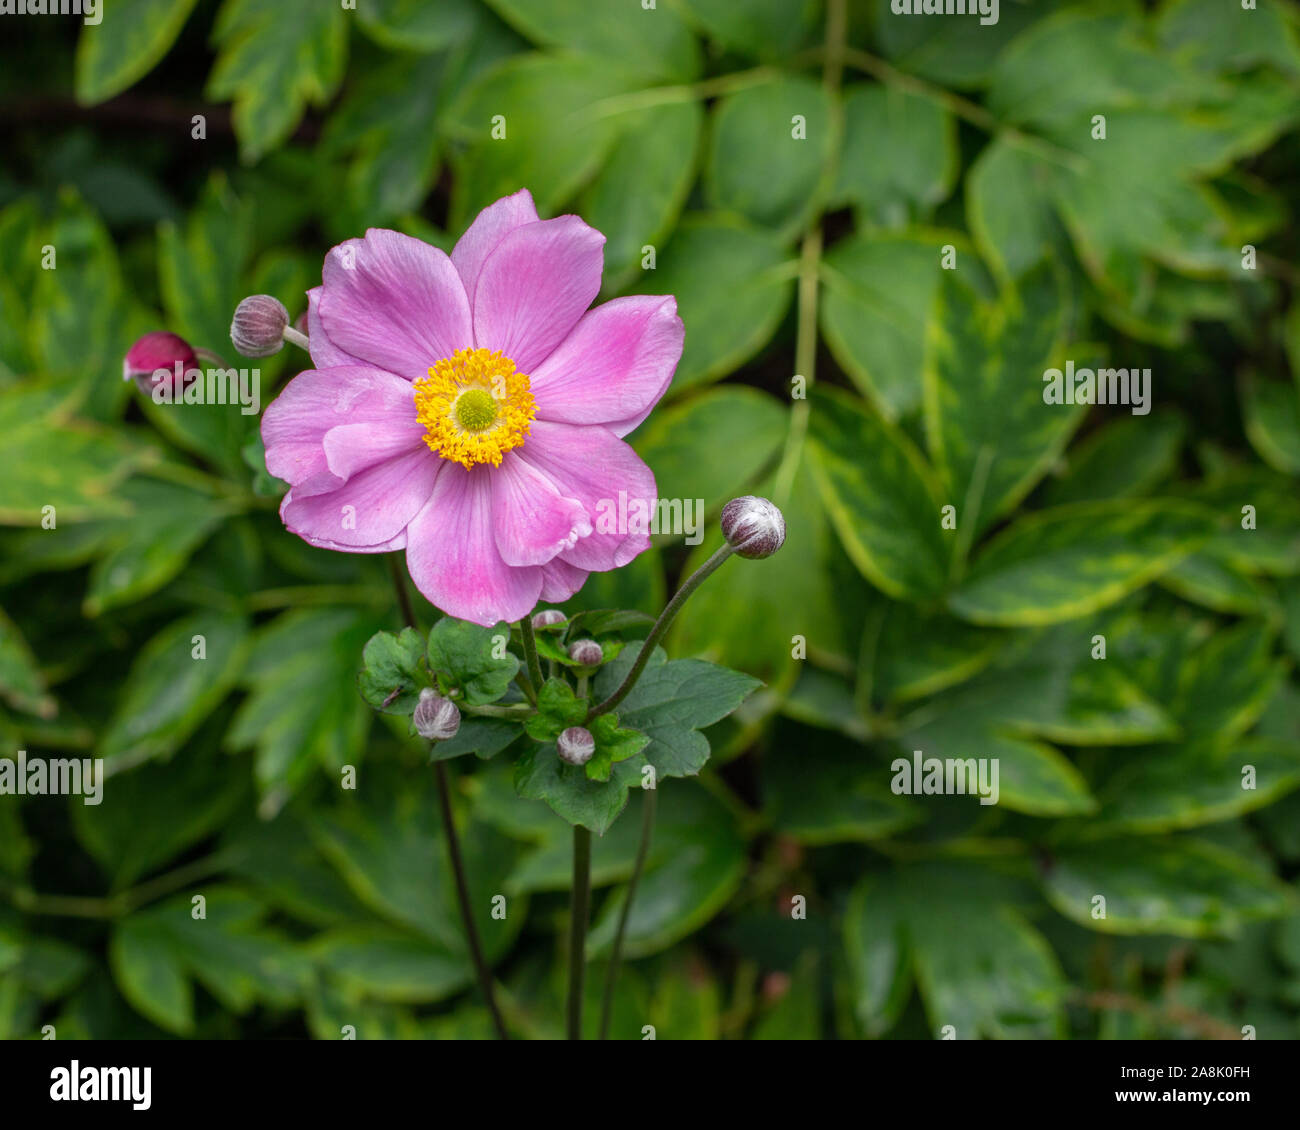 Anemone hupehensis blossom pink lilac flower on a background of green foliage. Perennial flowering plant of the genus Ranunculaceae from China Stock Photo